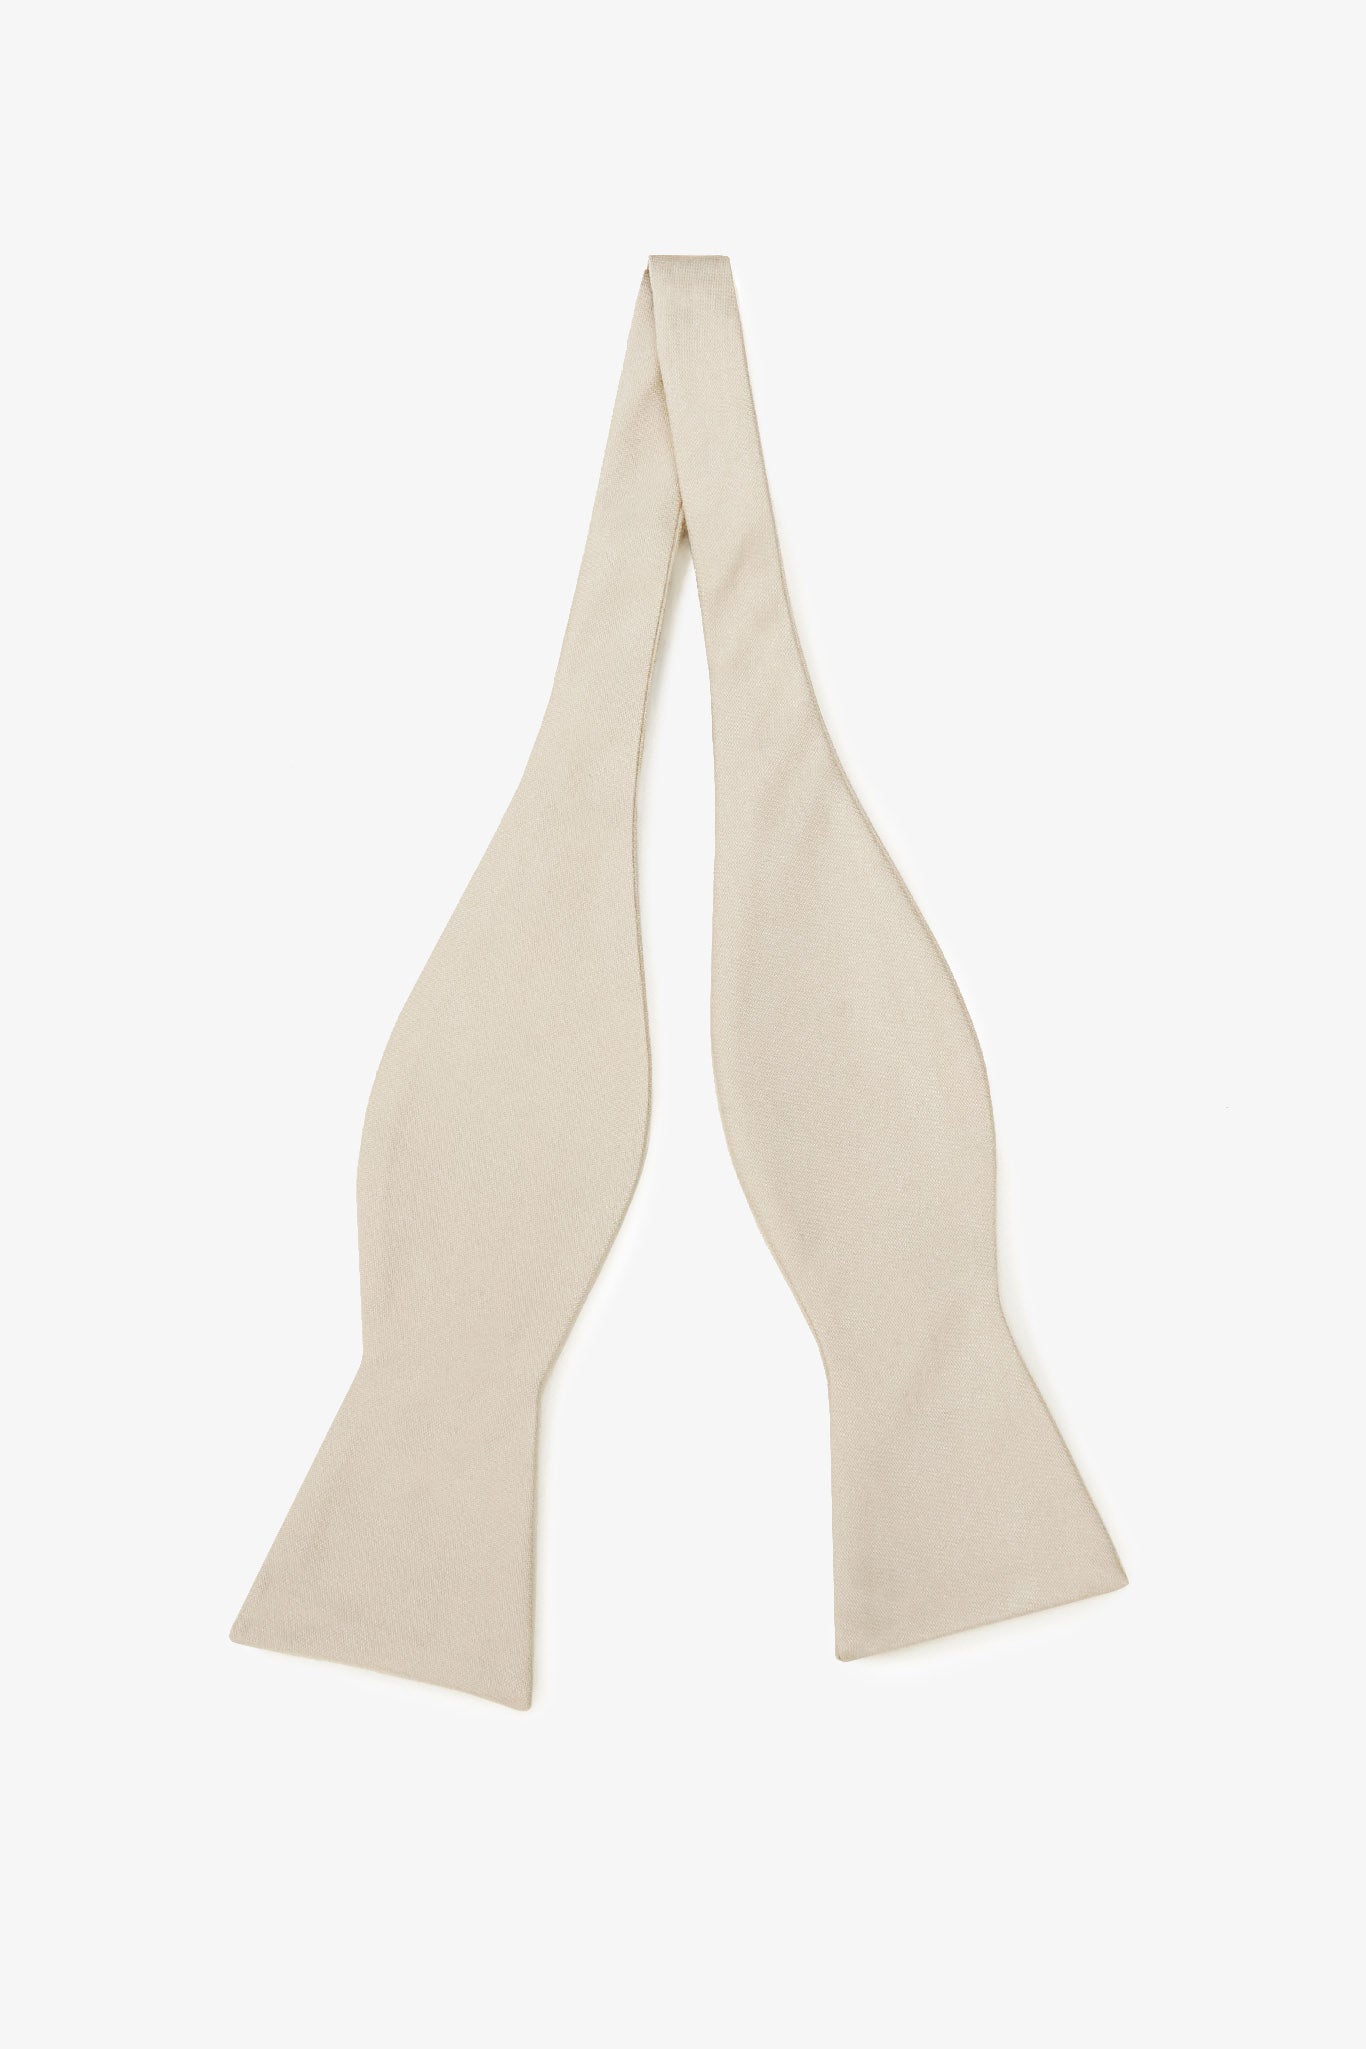 Groomsmen bowtie untied in neutral champagne light taupe 